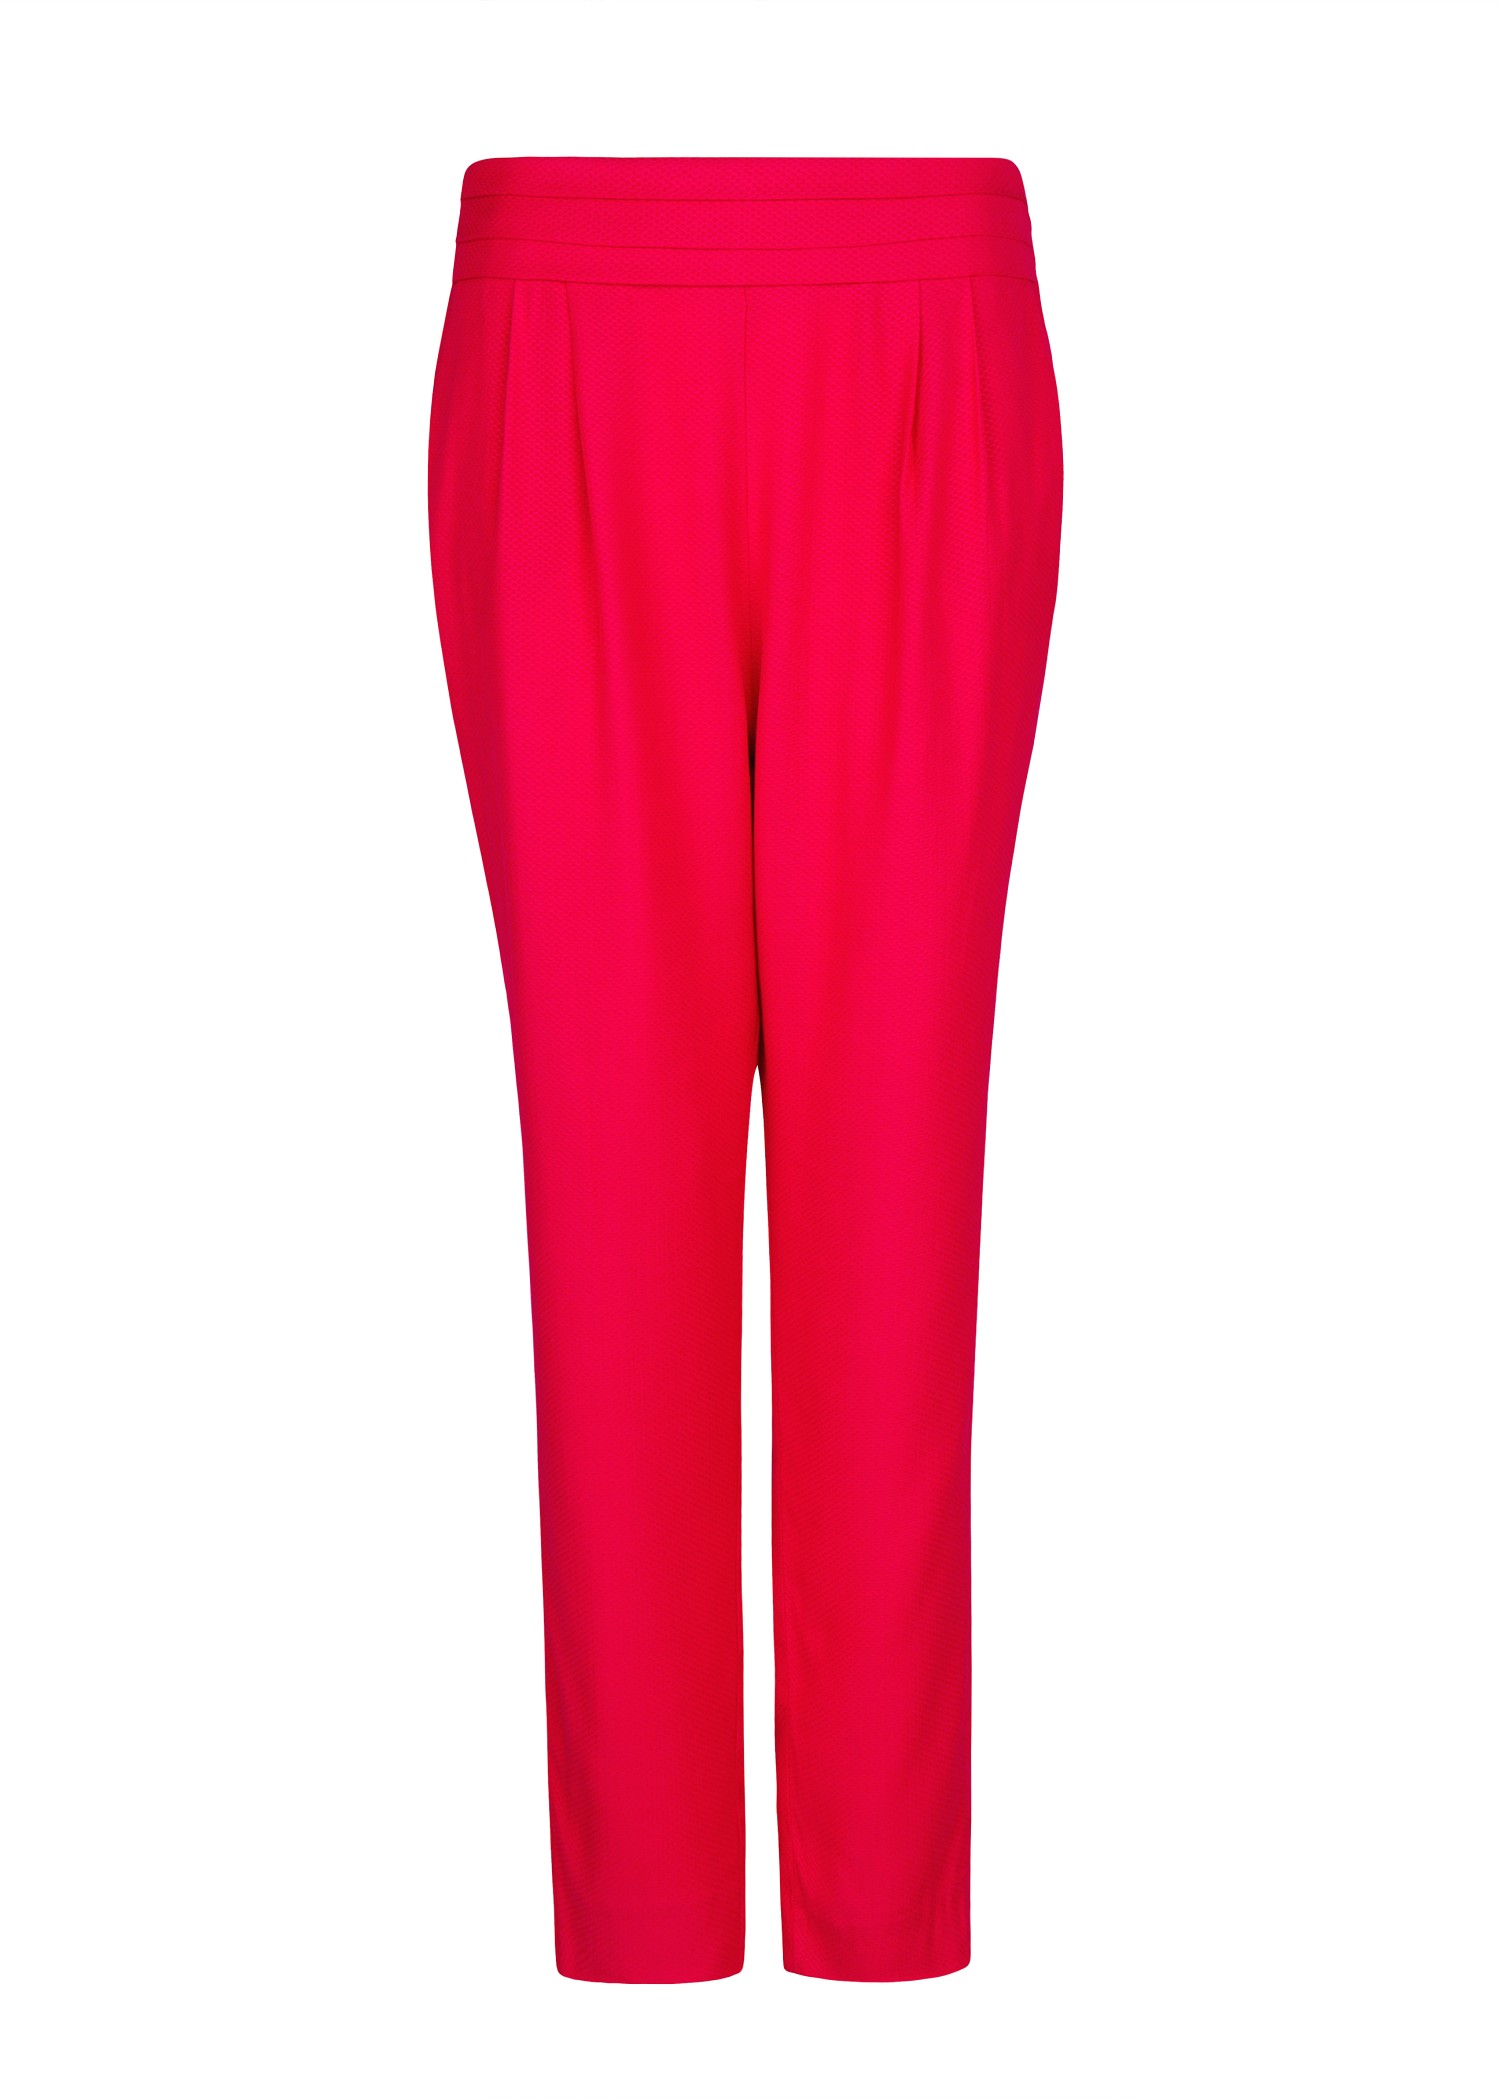 Lyst - Mango Trousers Sarawel in Red